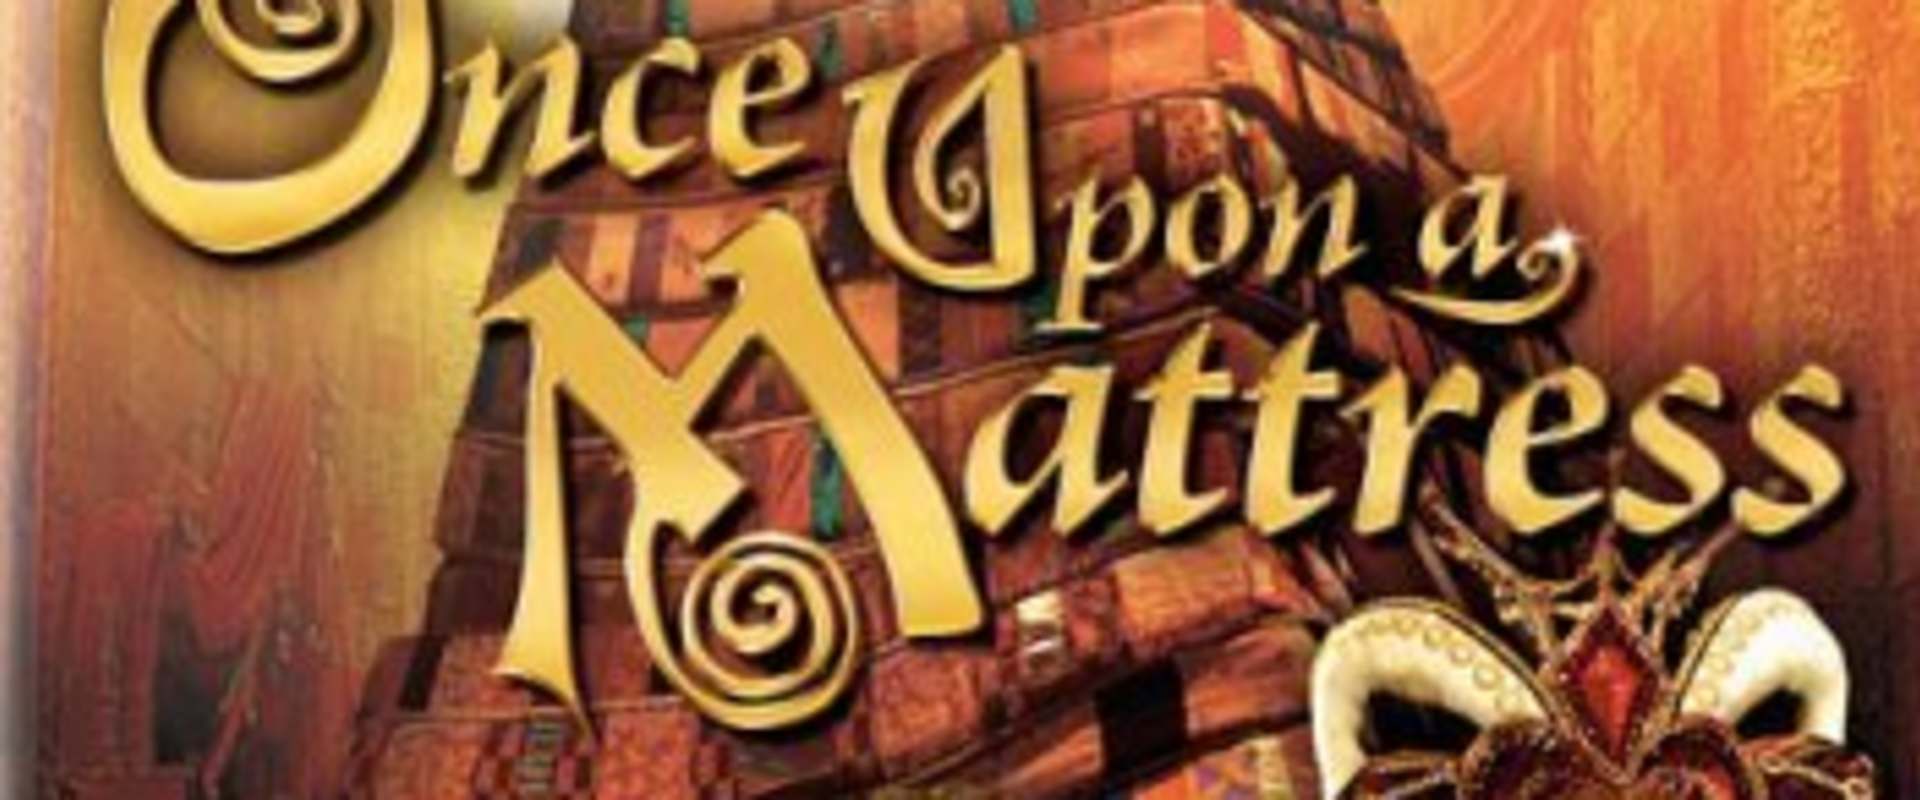 Once Upon A Mattress background 2